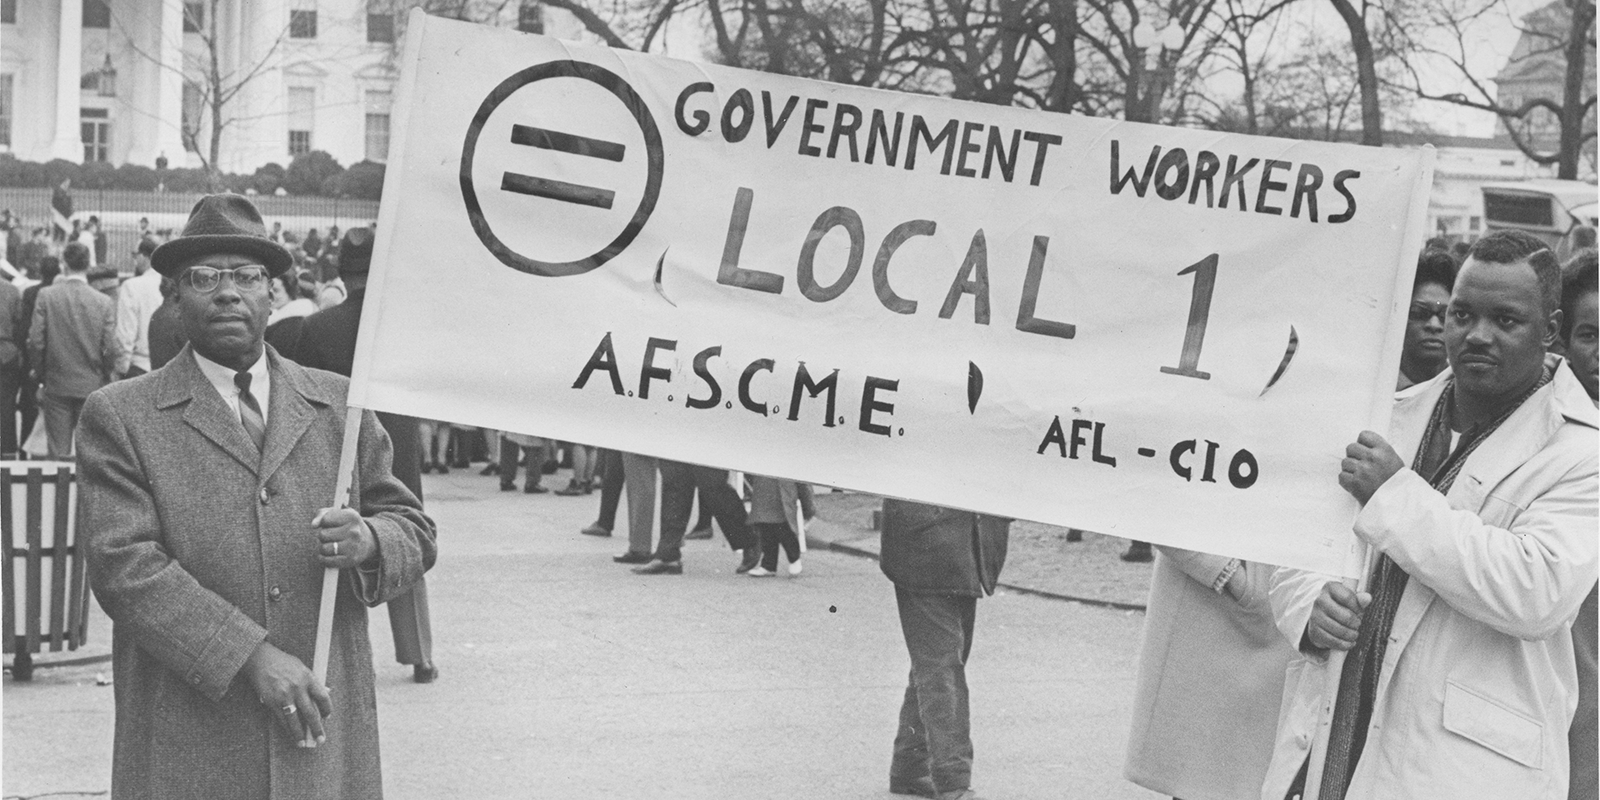 AFSCME history: The fight against discrimination in the District of Columbia government